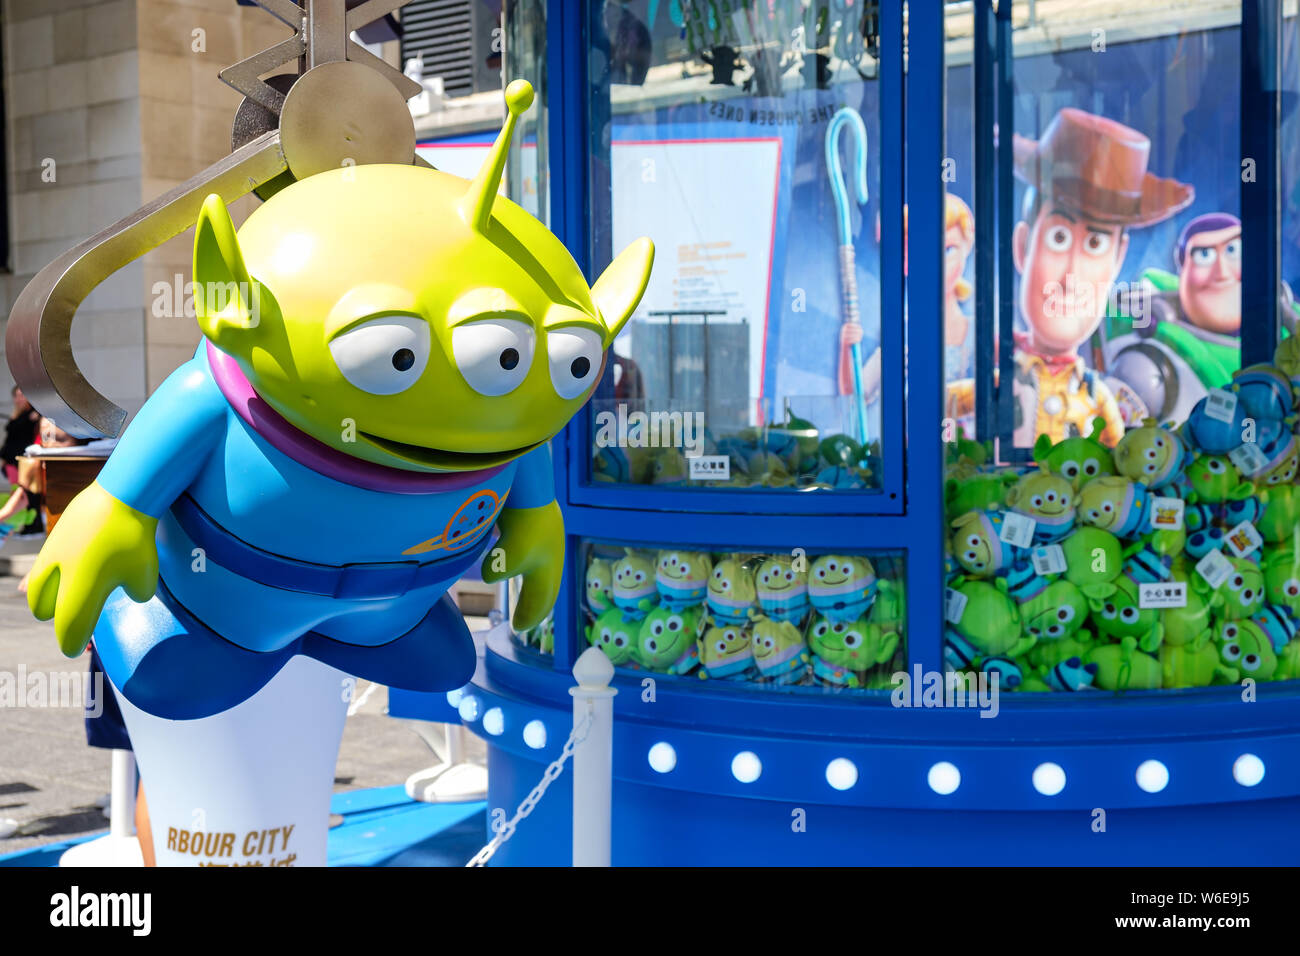 A replica of Little green man / Squeeze Toy Aliens during the Carnival.Toy Story 4 is celebrated with a themed carnival of different games and challenges at Hong Kong Harbour City. Stock Photo